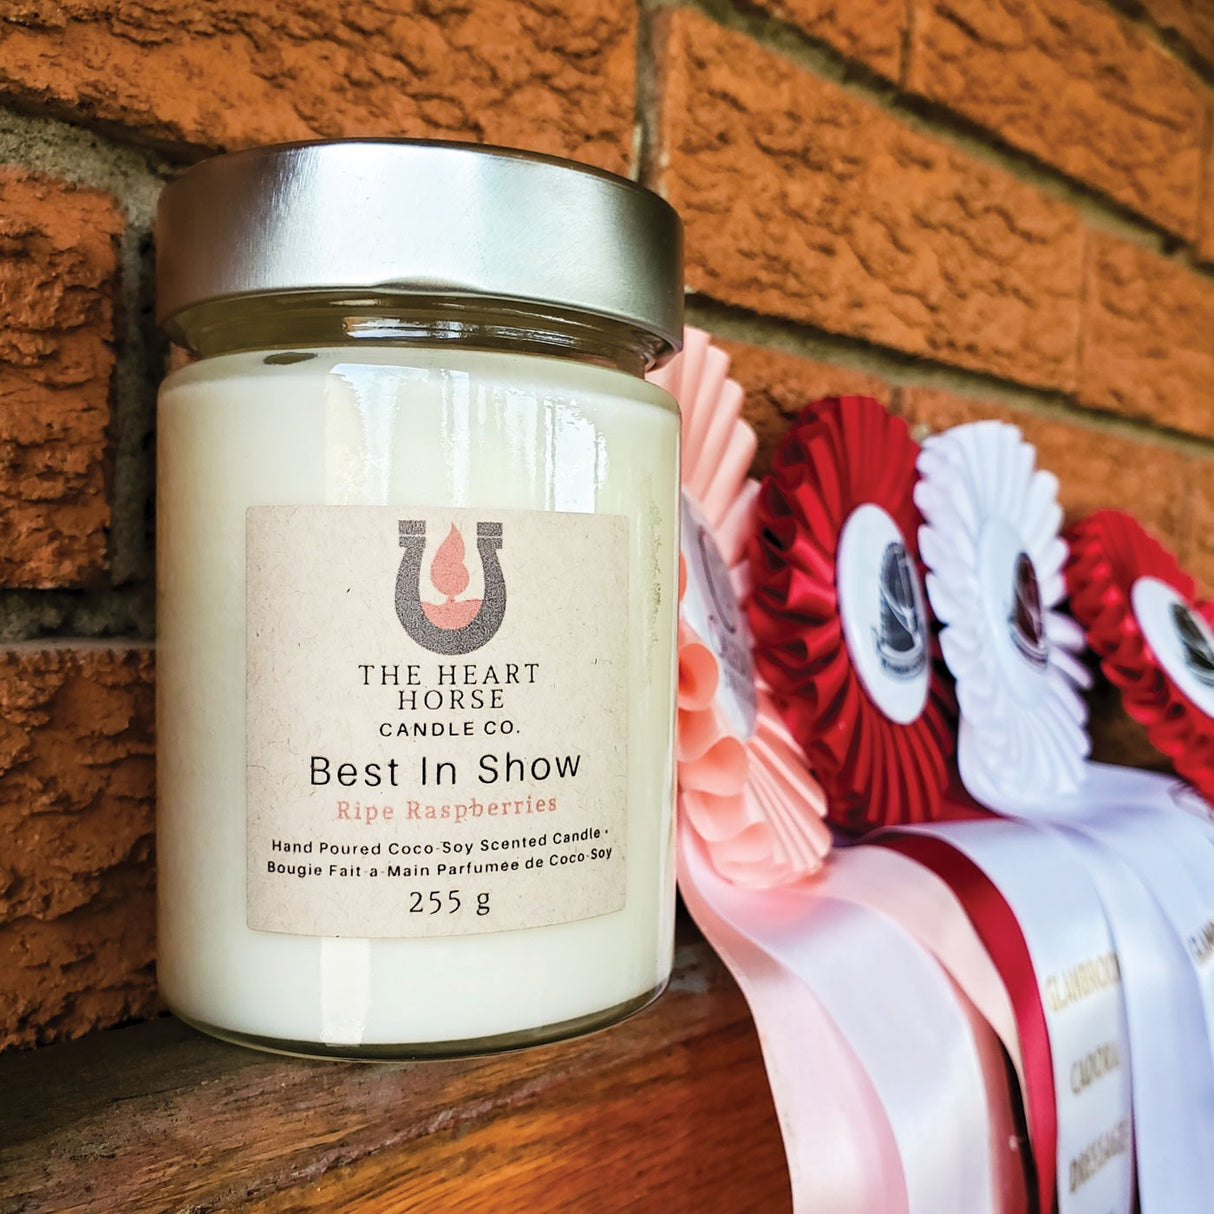 The Heart Horse Candle Co. Best In Show Candle